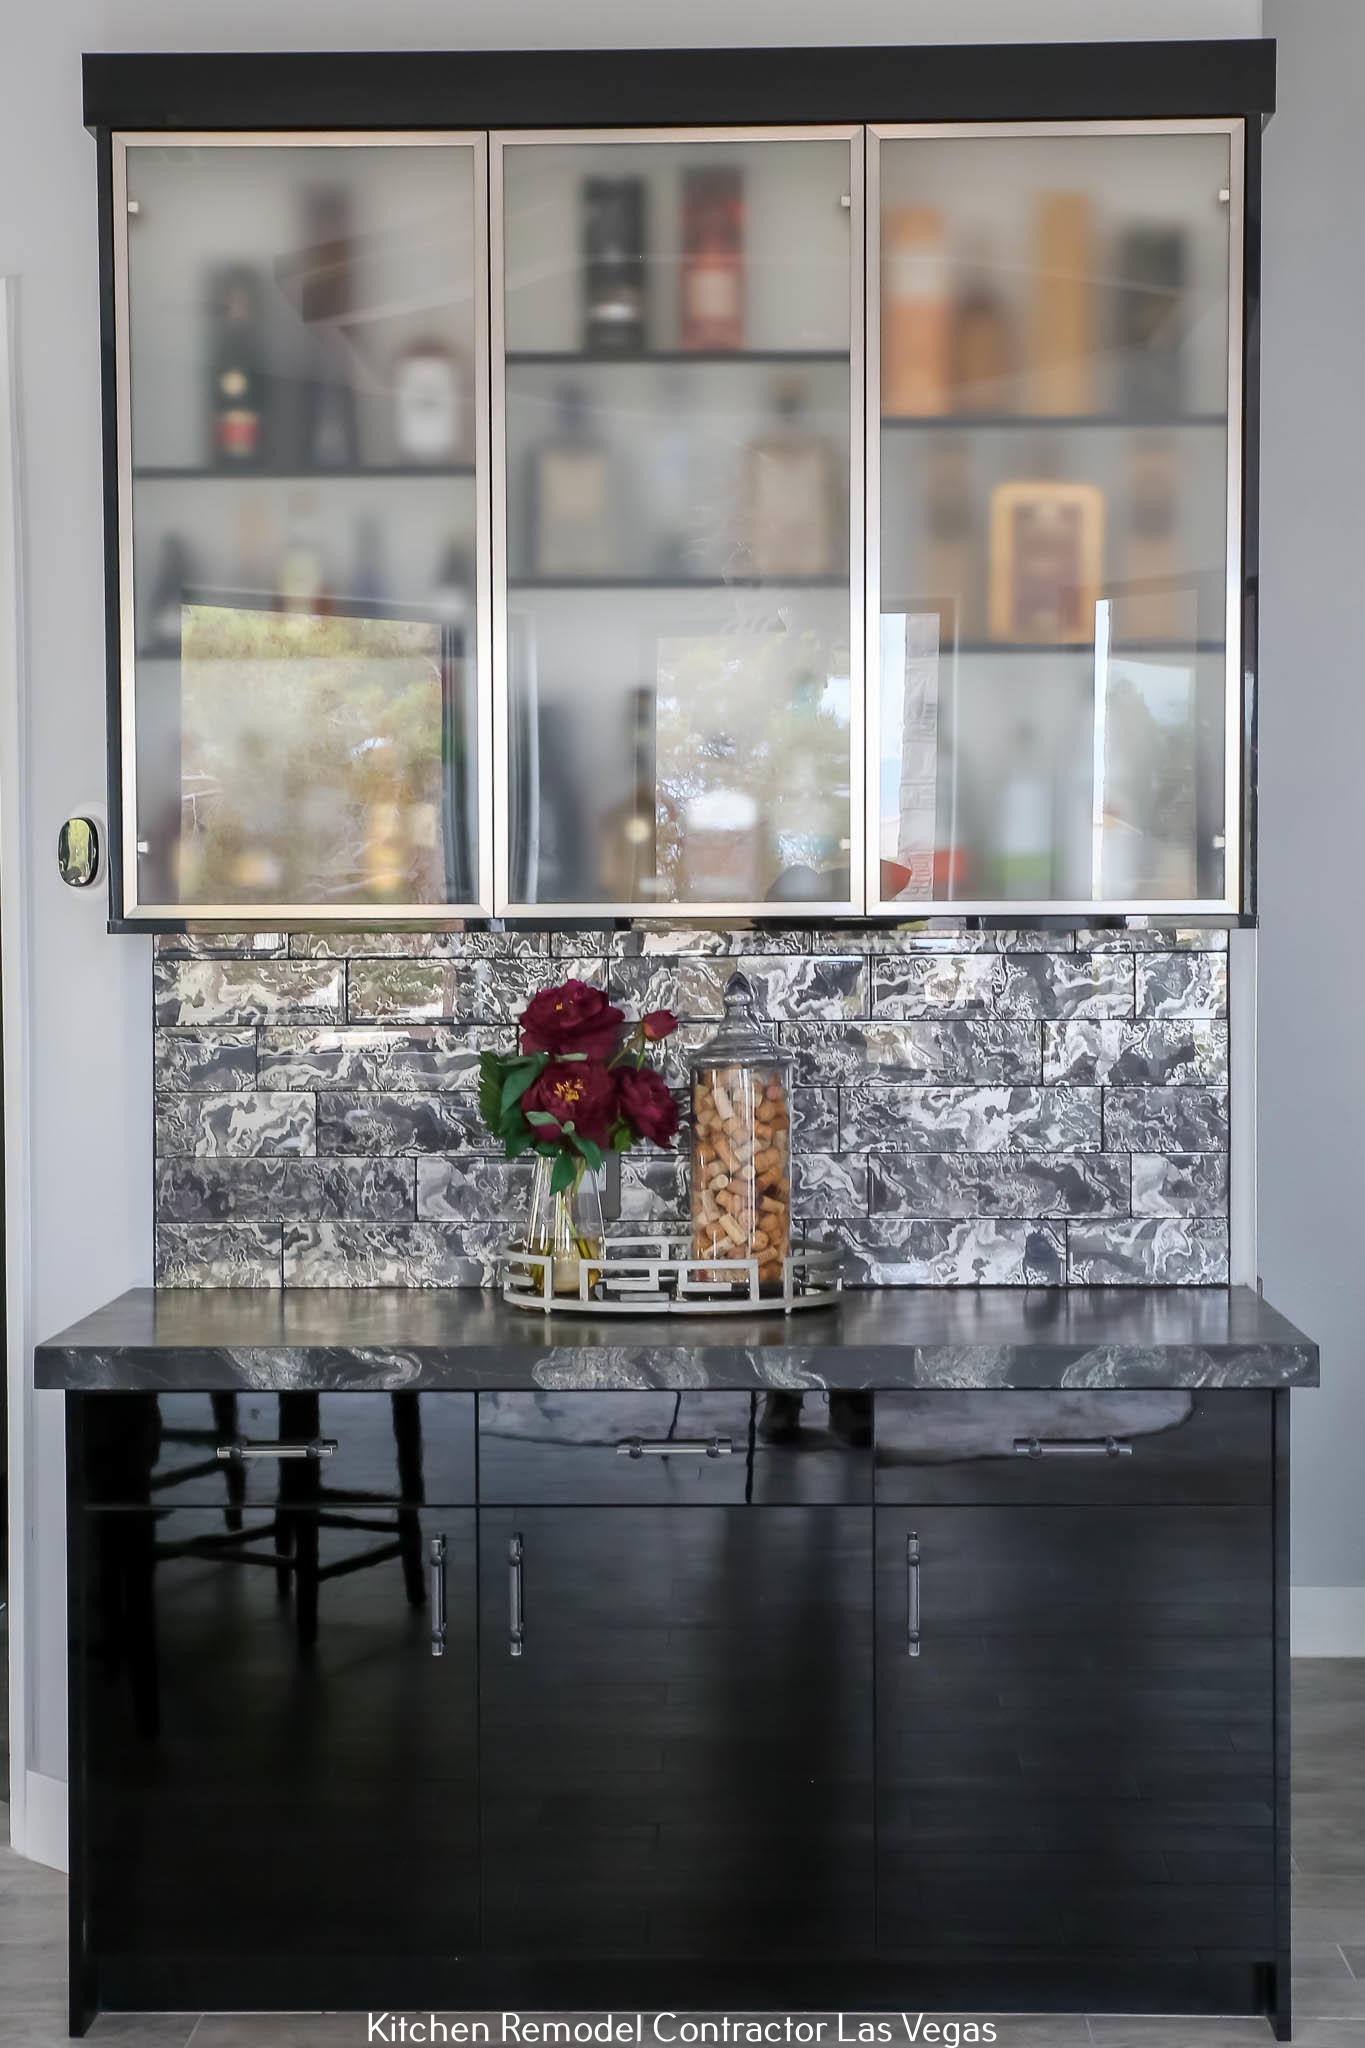 Continental Luxury Provides Insights into Kitchen Renovation Ideas in Las Vegas, NV